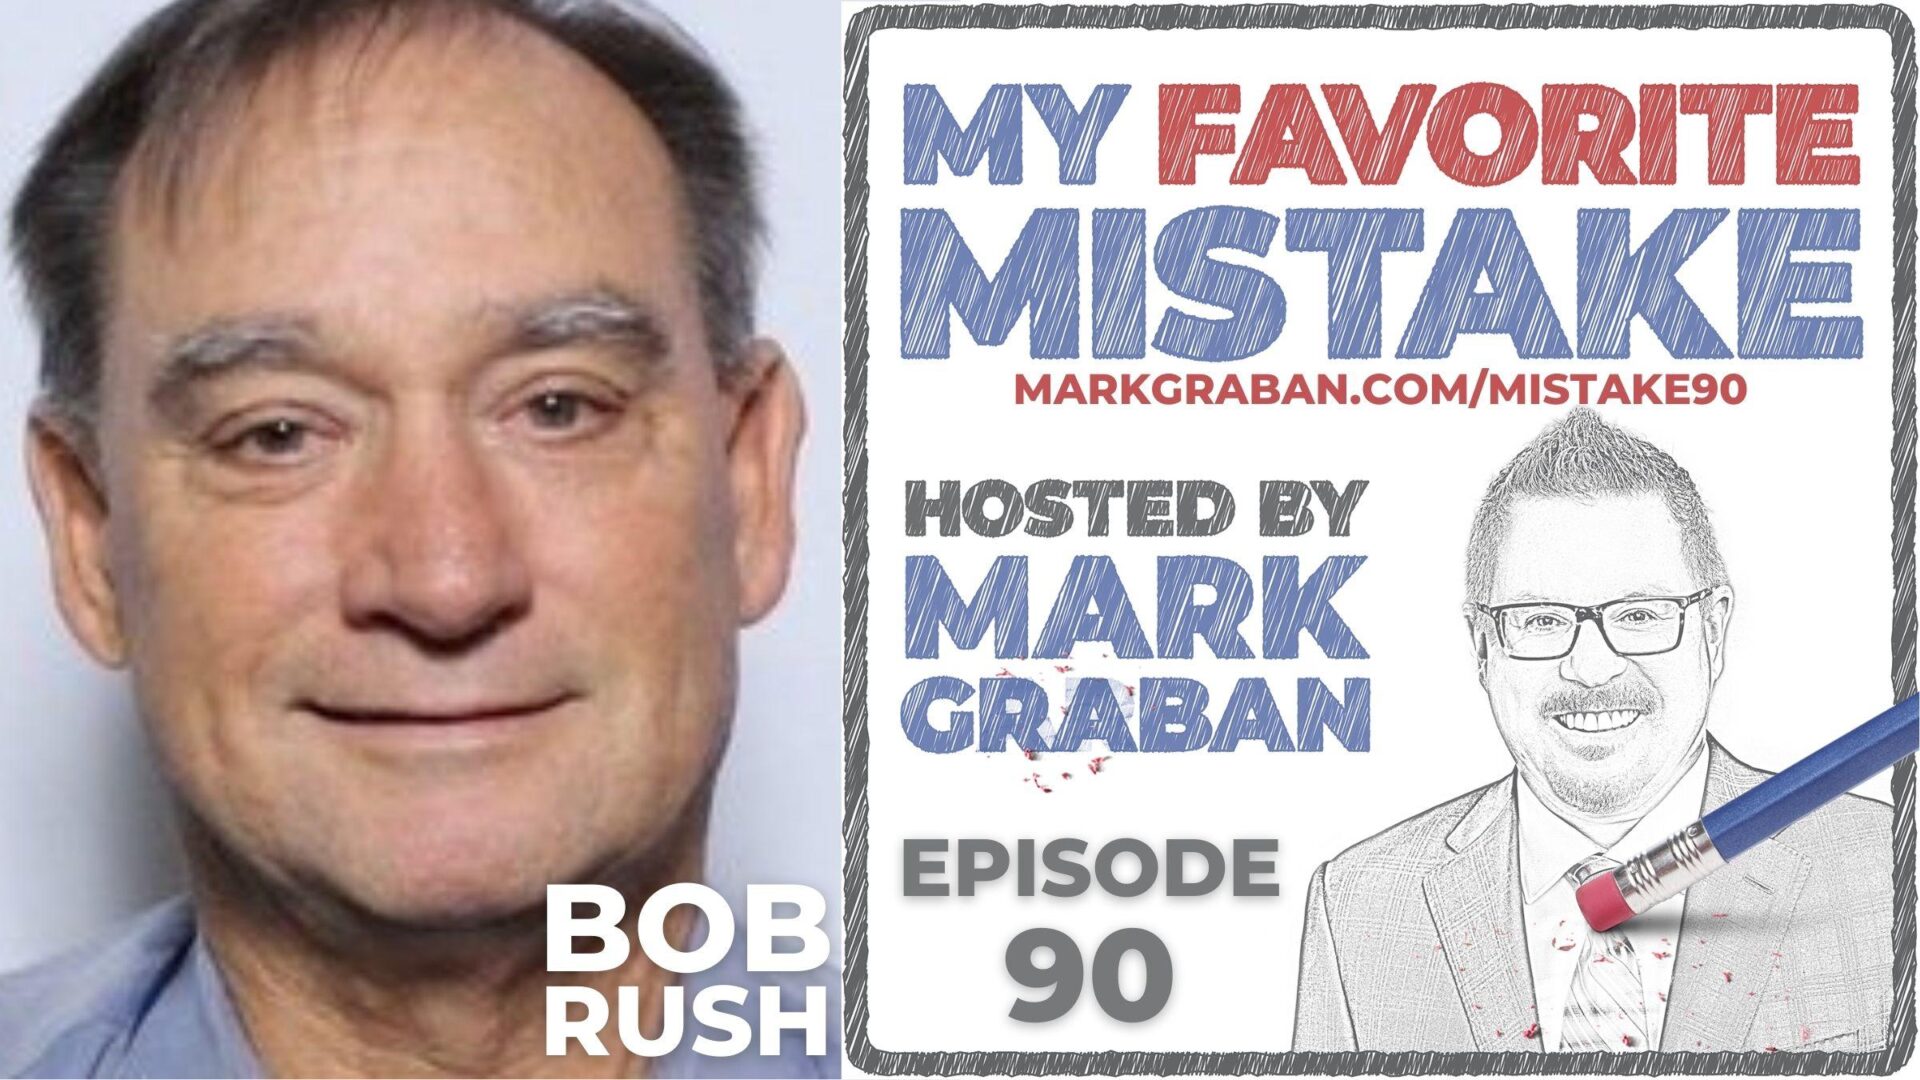 Lean Manufacturing Expert Bob Rush is “A Big Fan of Mistakes”